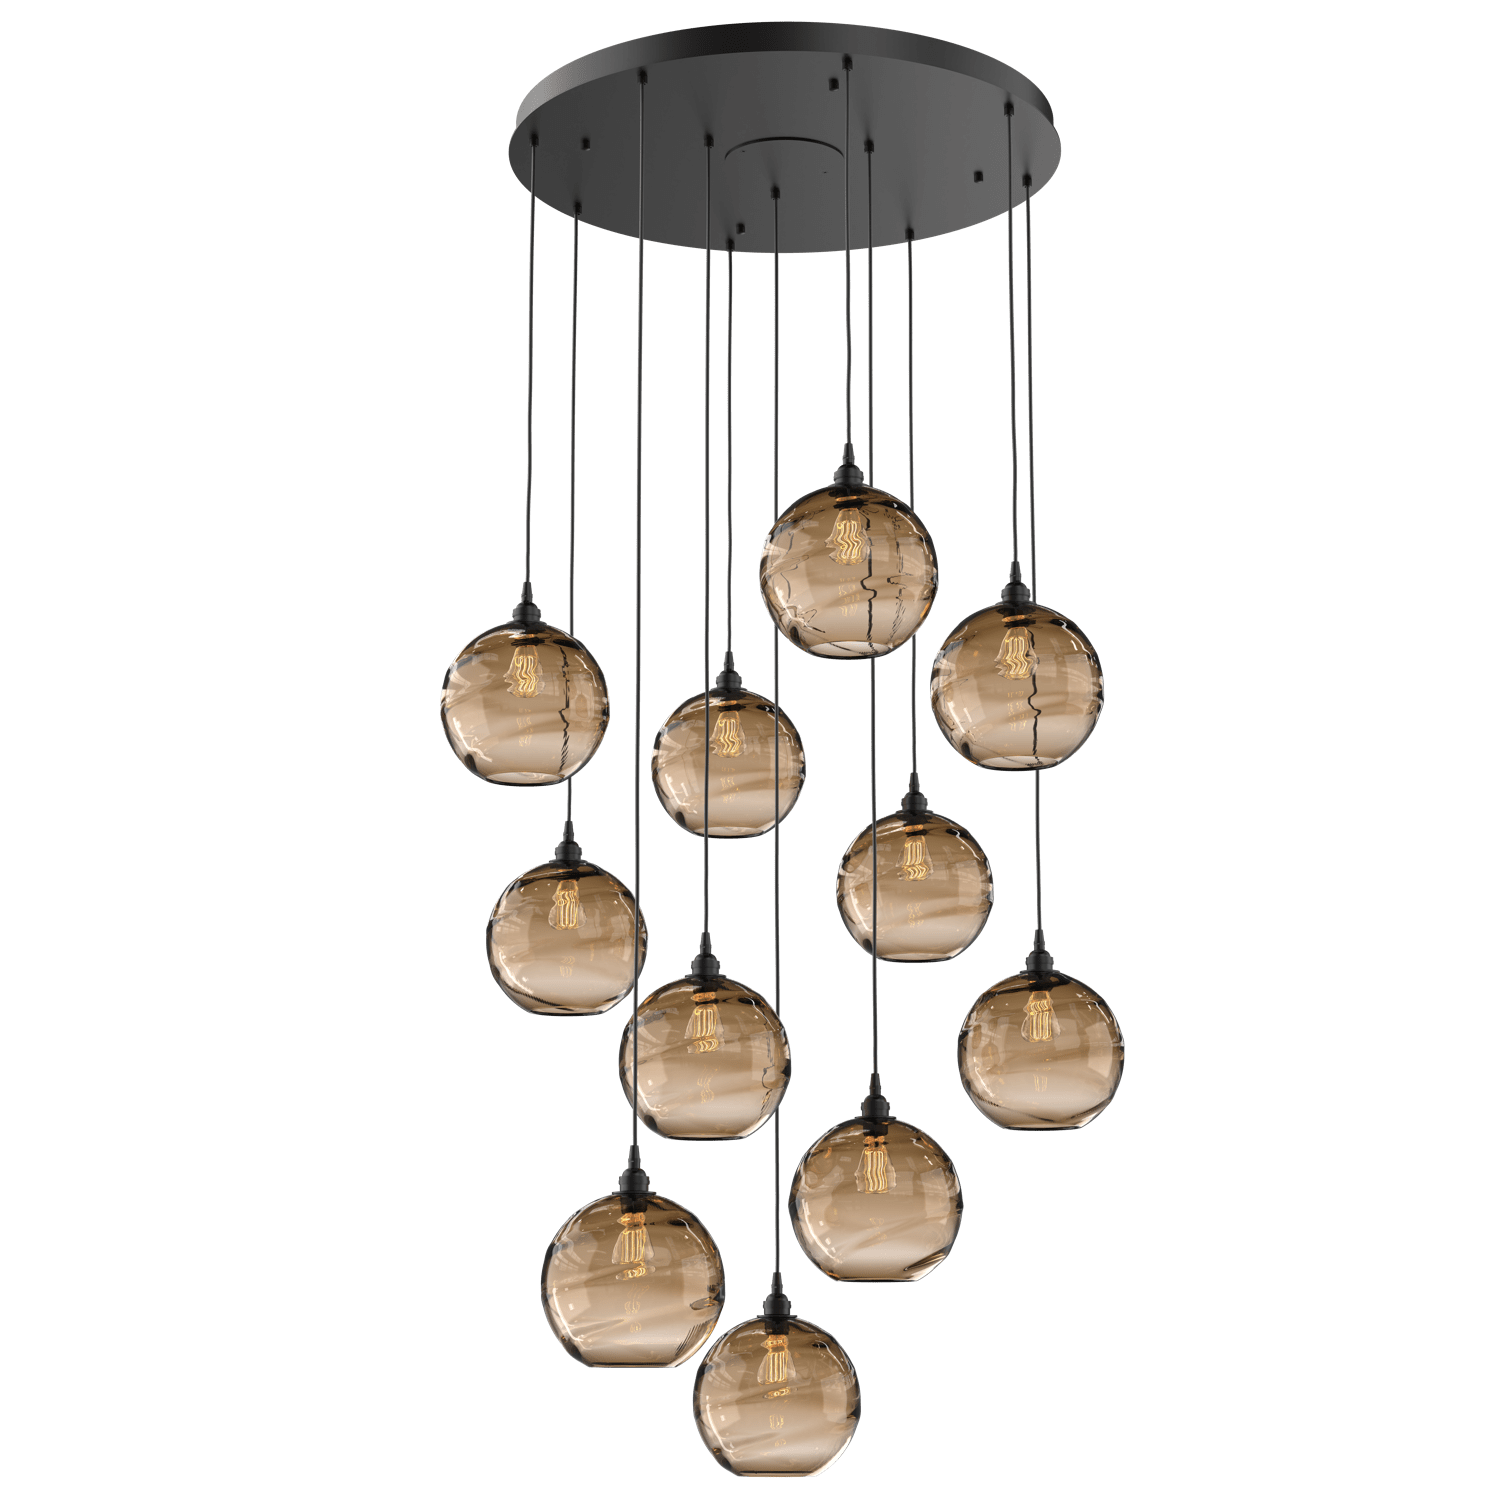 CHB0047-11-MB-OB-Hammerton-Studio-Optic-Blown-Glass-Terra-11-light-round-pendant-chandelier-with-matte-black-finish-and-optic-bronze-blown-glass-shades-and-incandescent-lamping